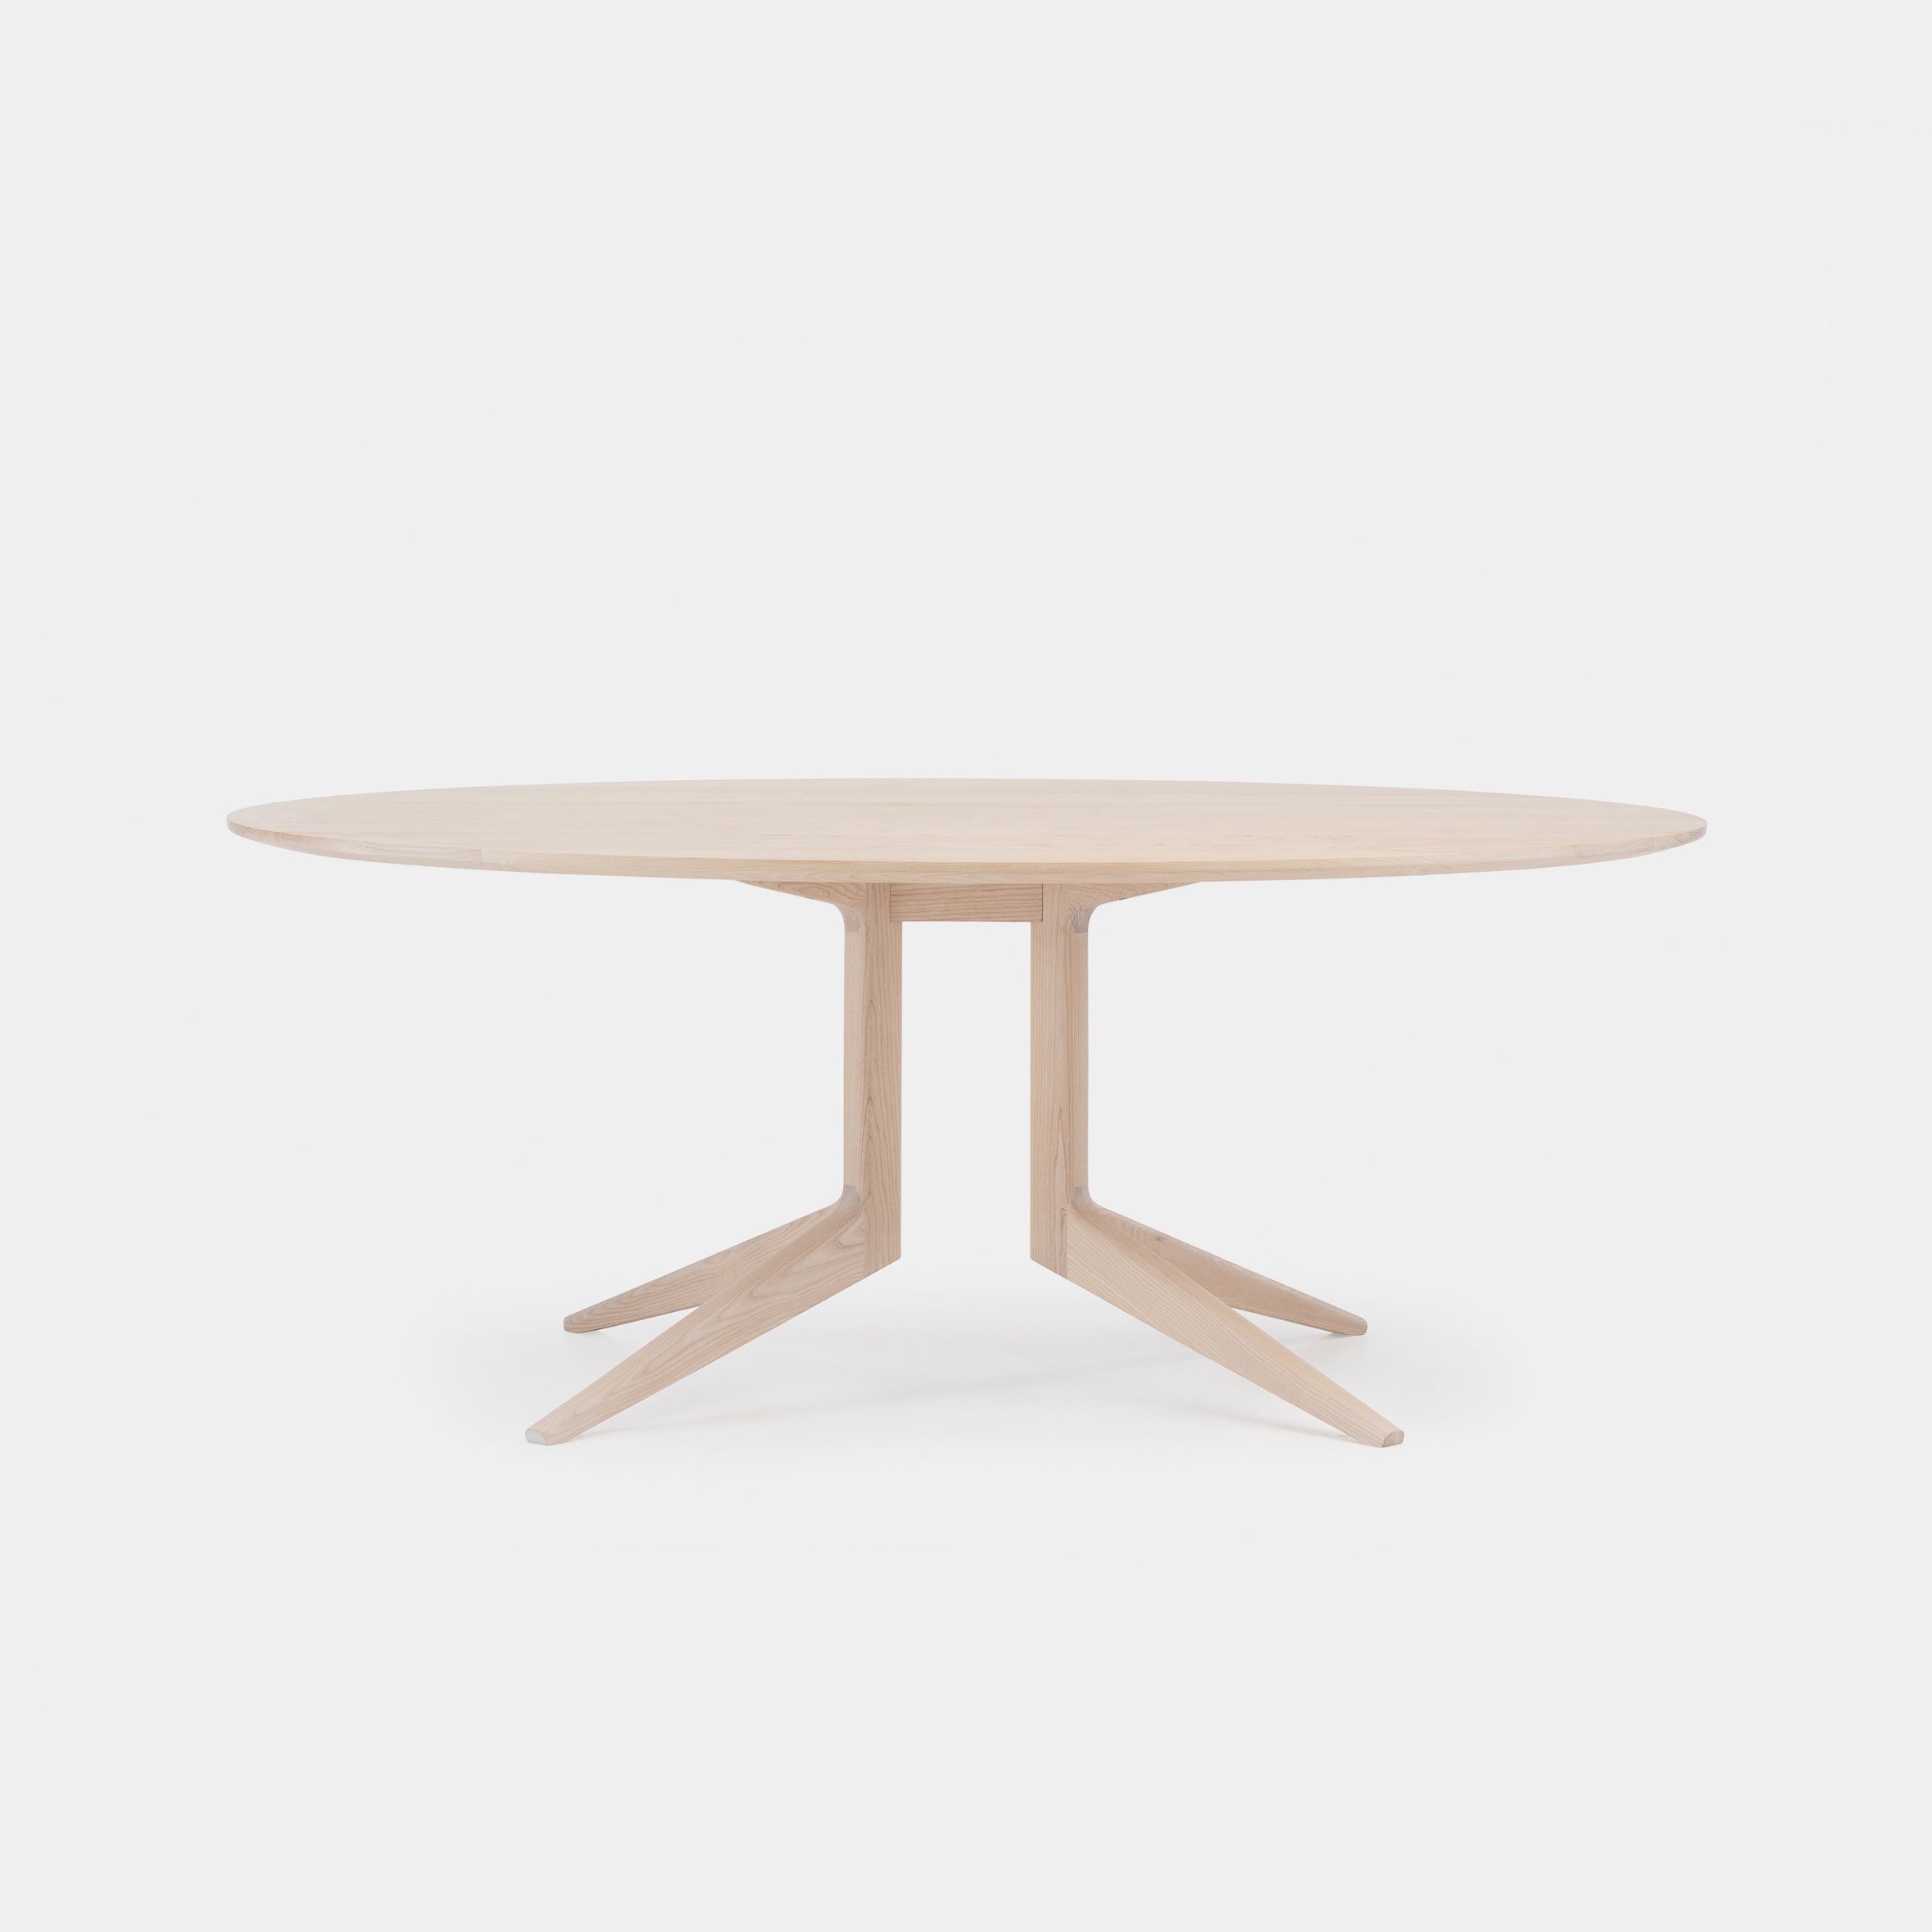 Light Oval Dining Table